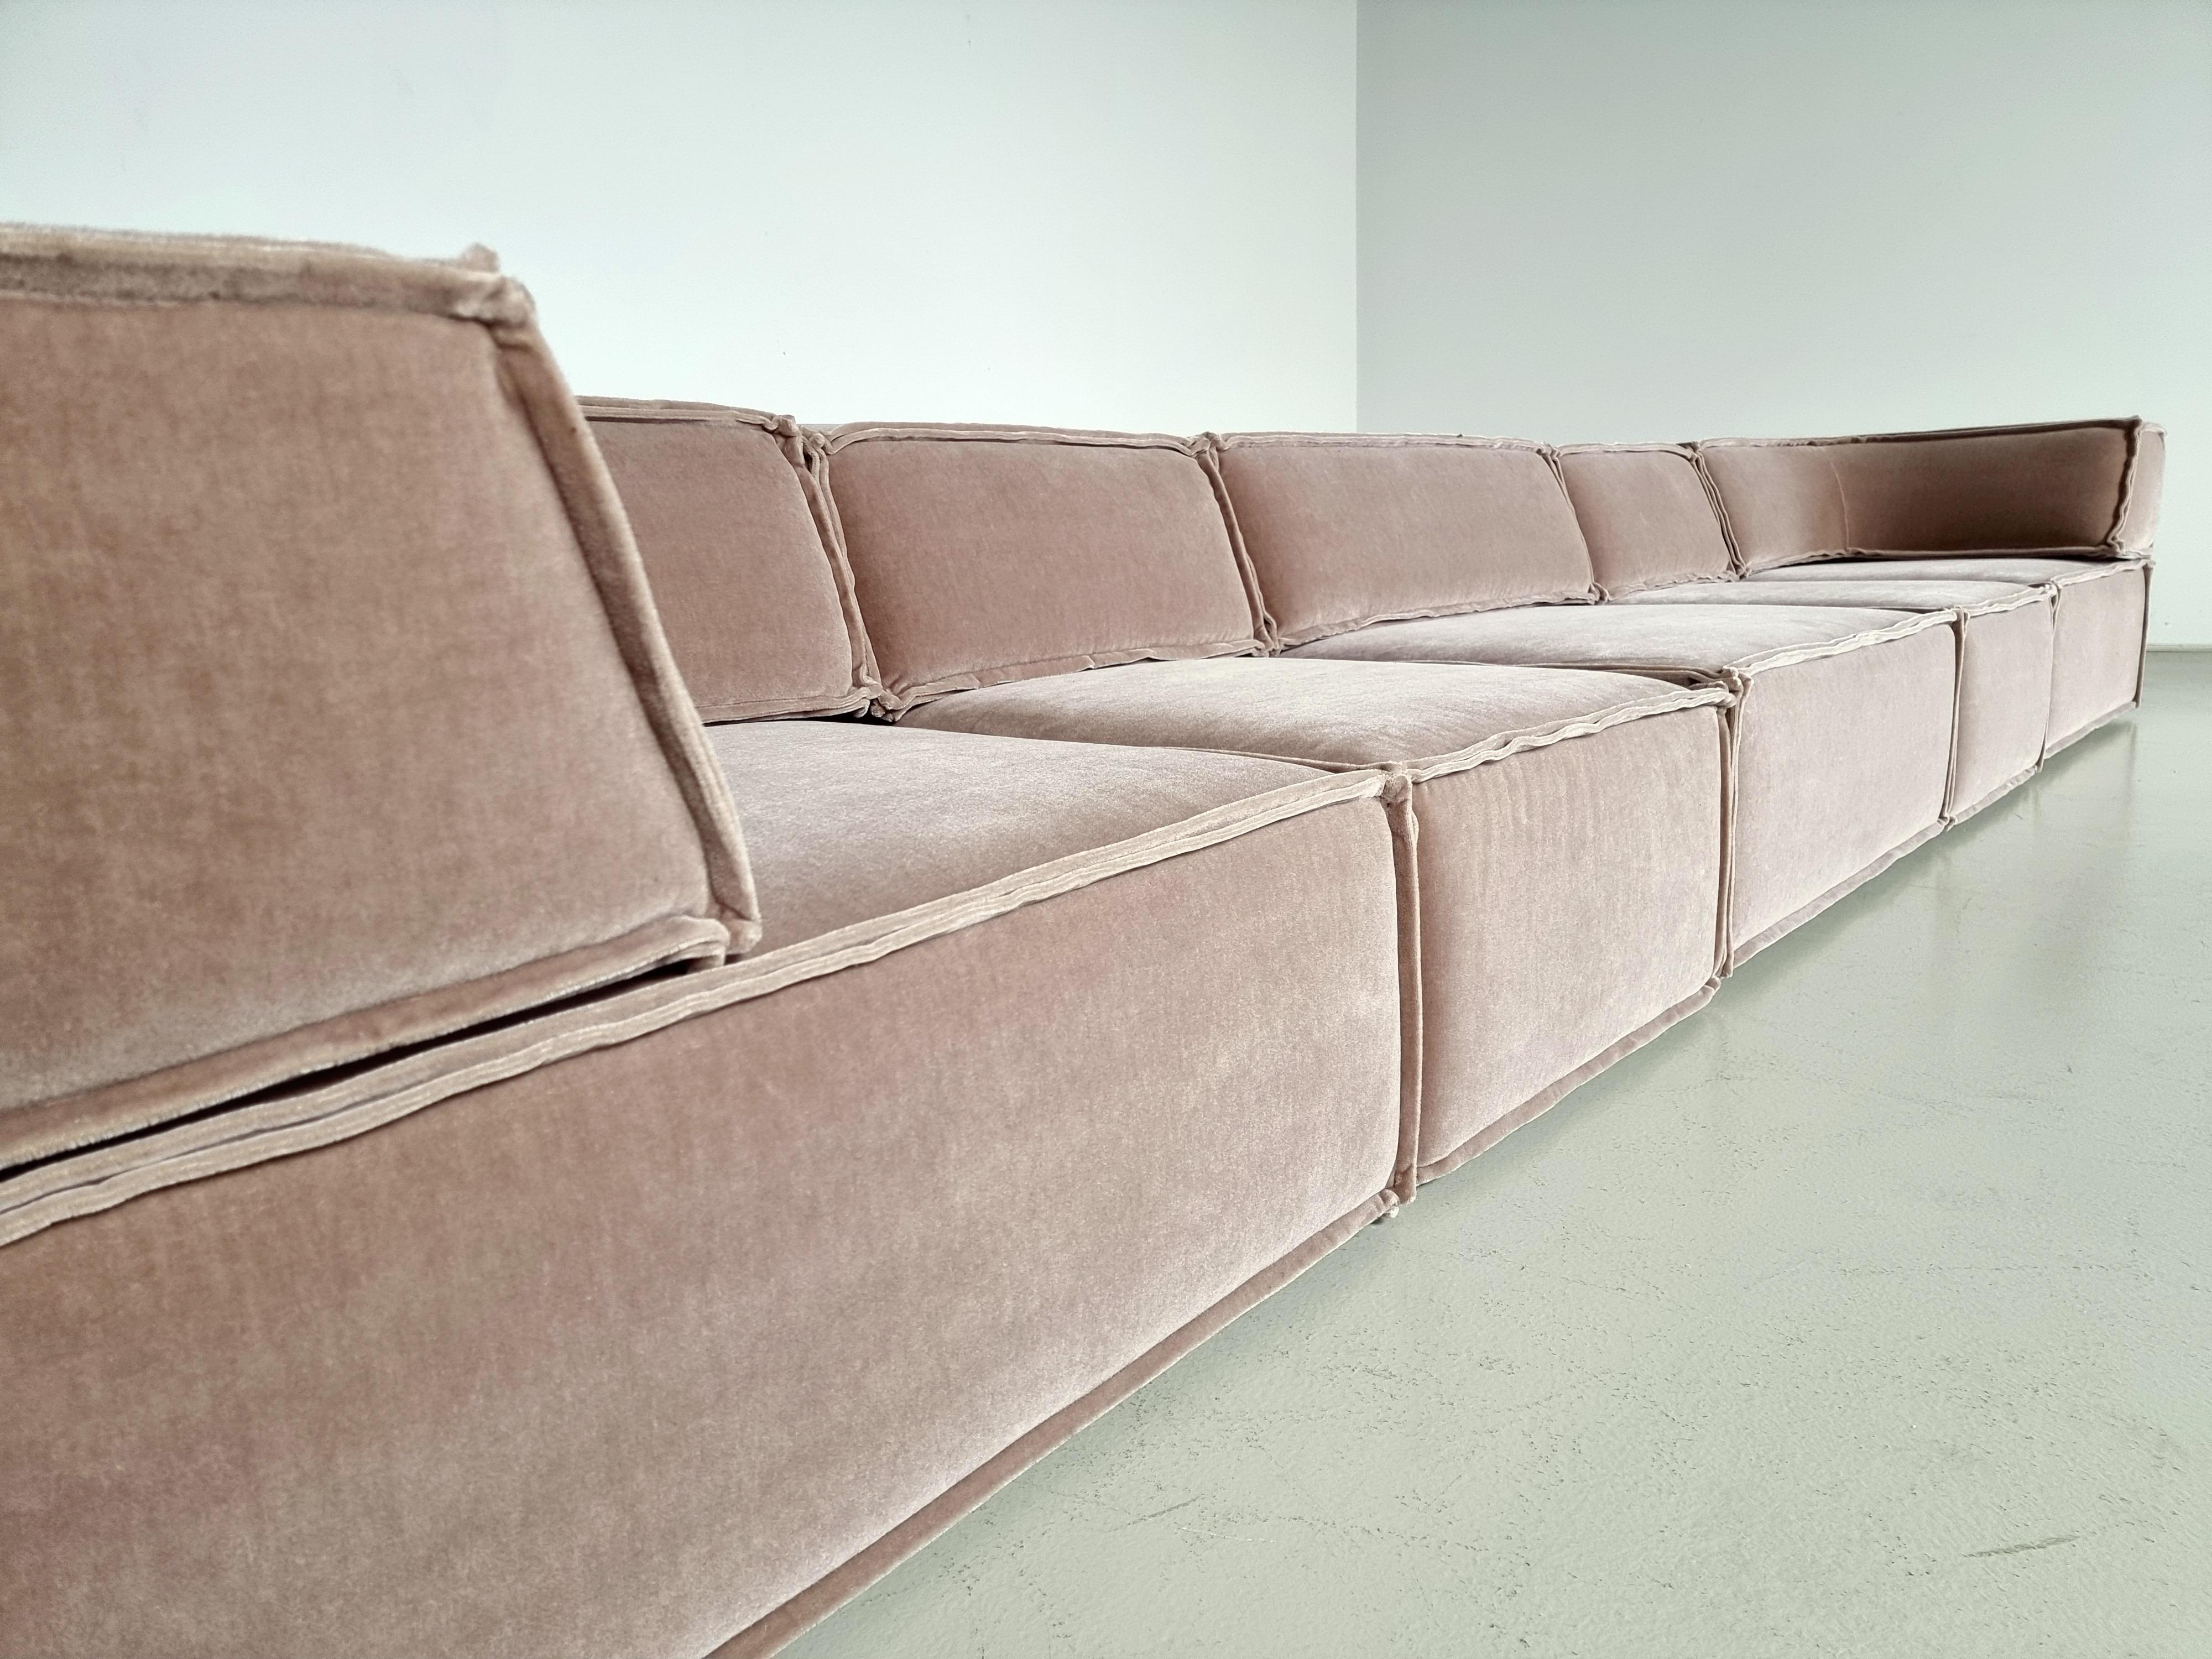 COR Trio Sofa by Team Form Ag for COR Furniture, Germany, 1970s In Excellent Condition For Sale In amstelveen, NL